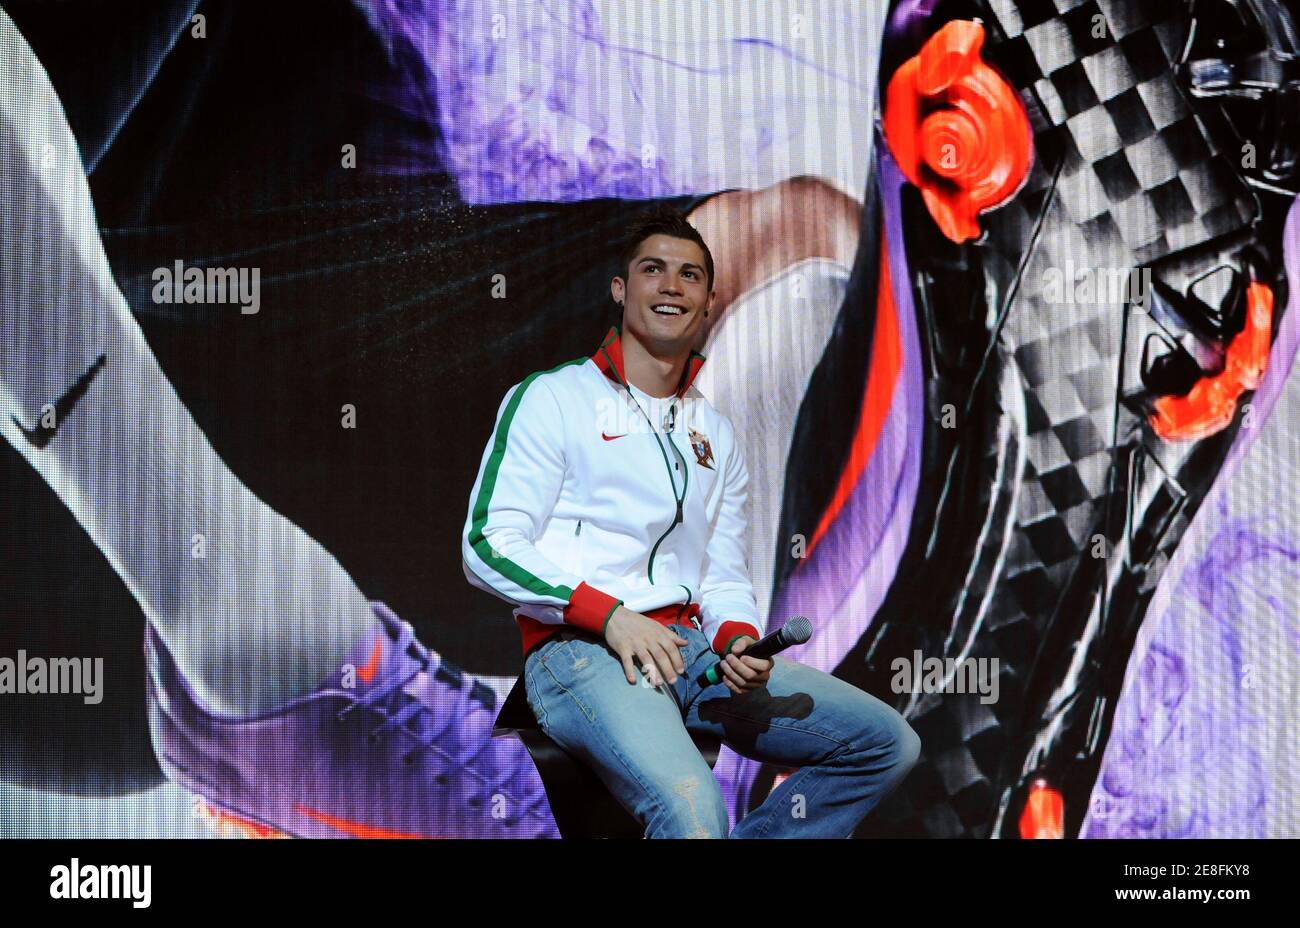 Real Madrid's Portuguese soccer player Cristiano Ronaldo smiles during the  launch of the new Nike Mercurial Vapor Superfly II soccer boot at an event  in London February 24, 2010. REUTERS/Jas Lehal (BRITAIN -